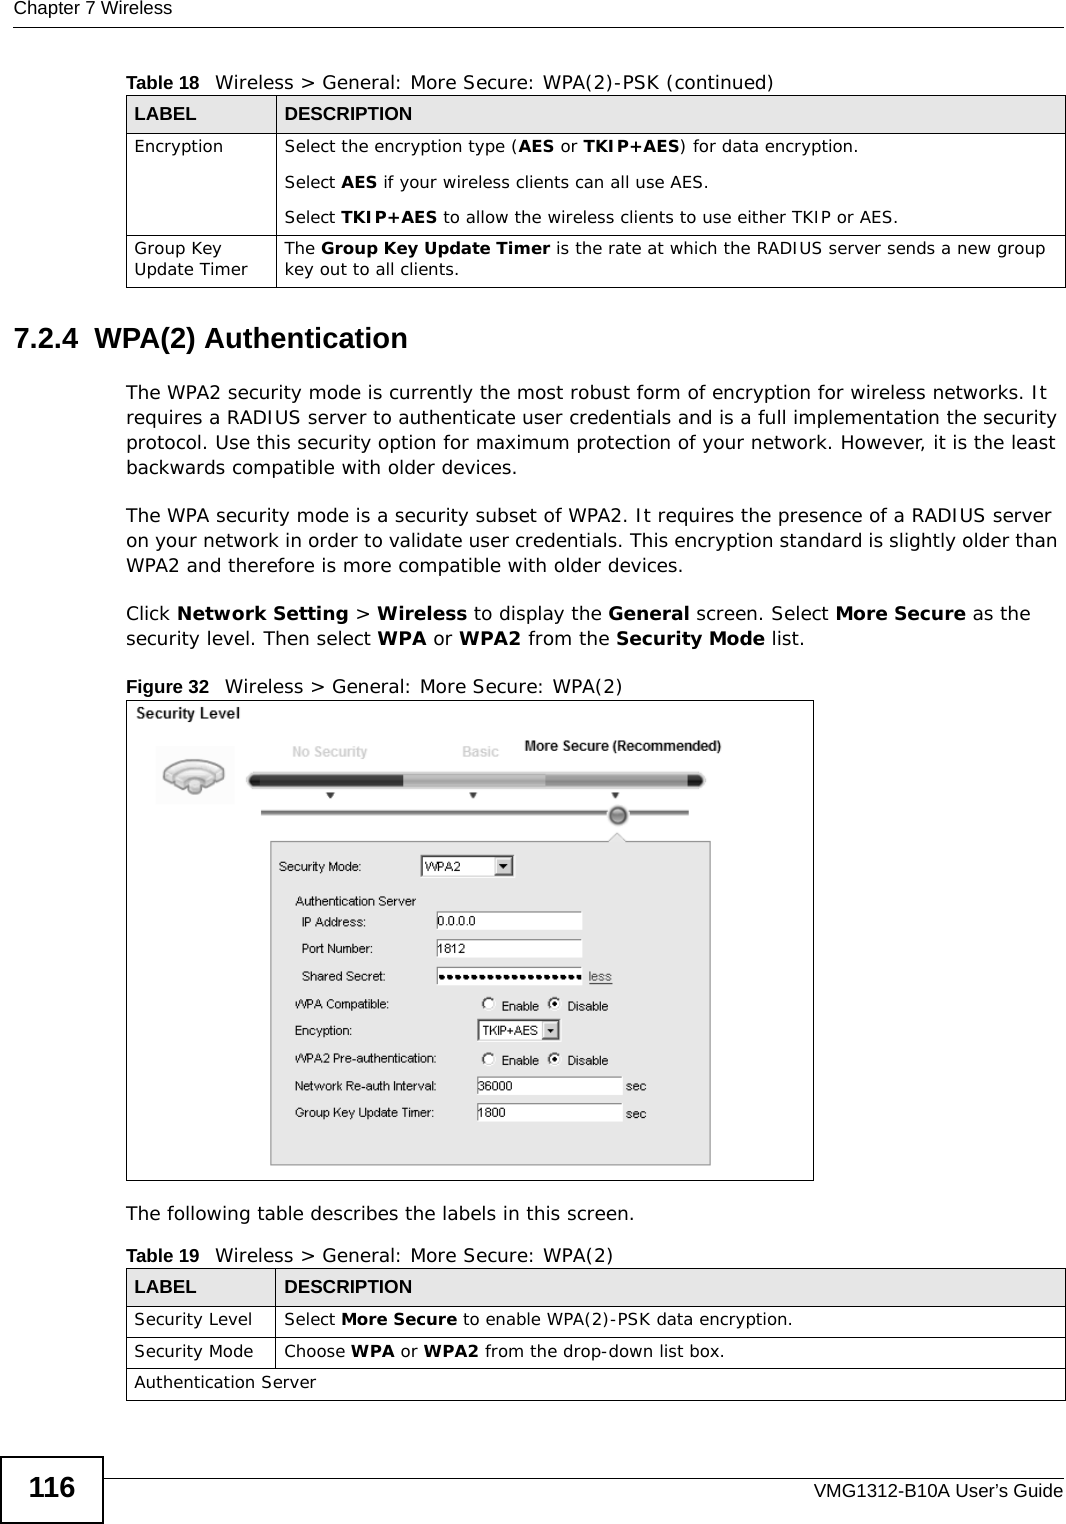 Chapter 7 WirelessVMG1312-B10A User’s Guide1167.2.4  WPA(2) AuthenticationThe WPA2 security mode is currently the most robust form of encryption for wireless networks. It requires a RADIUS server to authenticate user credentials and is a full implementation the security protocol. Use this security option for maximum protection of your network. However, it is the least backwards compatible with older devices.The WPA security mode is a security subset of WPA2. It requires the presence of a RADIUS server on your network in order to validate user credentials. This encryption standard is slightly older than WPA2 and therefore is more compatible with older devices.Click Network Setting &gt; Wireless to display the General screen. Select More Secure as the security level. Then select WPA or WPA2 from the Security Mode list.Figure 32   Wireless &gt; General: More Secure: WPA(2)The following table describes the labels in this screen.Encryption Select the encryption type (AES or TKIP+AES) for data encryption.Select AES if your wireless clients can all use AES.Select TKIP+AES to allow the wireless clients to use either TKIP or AES.Group Key Update Timer The Group Key Update Timer is the rate at which the RADIUS server sends a new group key out to all clients. Table 18   Wireless &gt; General: More Secure: WPA(2)-PSK (continued)LABEL DESCRIPTIONTable 19   Wireless &gt; General: More Secure: WPA(2)LABEL DESCRIPTIONSecurity Level Select More Secure to enable WPA(2)-PSK data encryption.Security Mode Choose WPA or WPA2 from the drop-down list box.Authentication Server